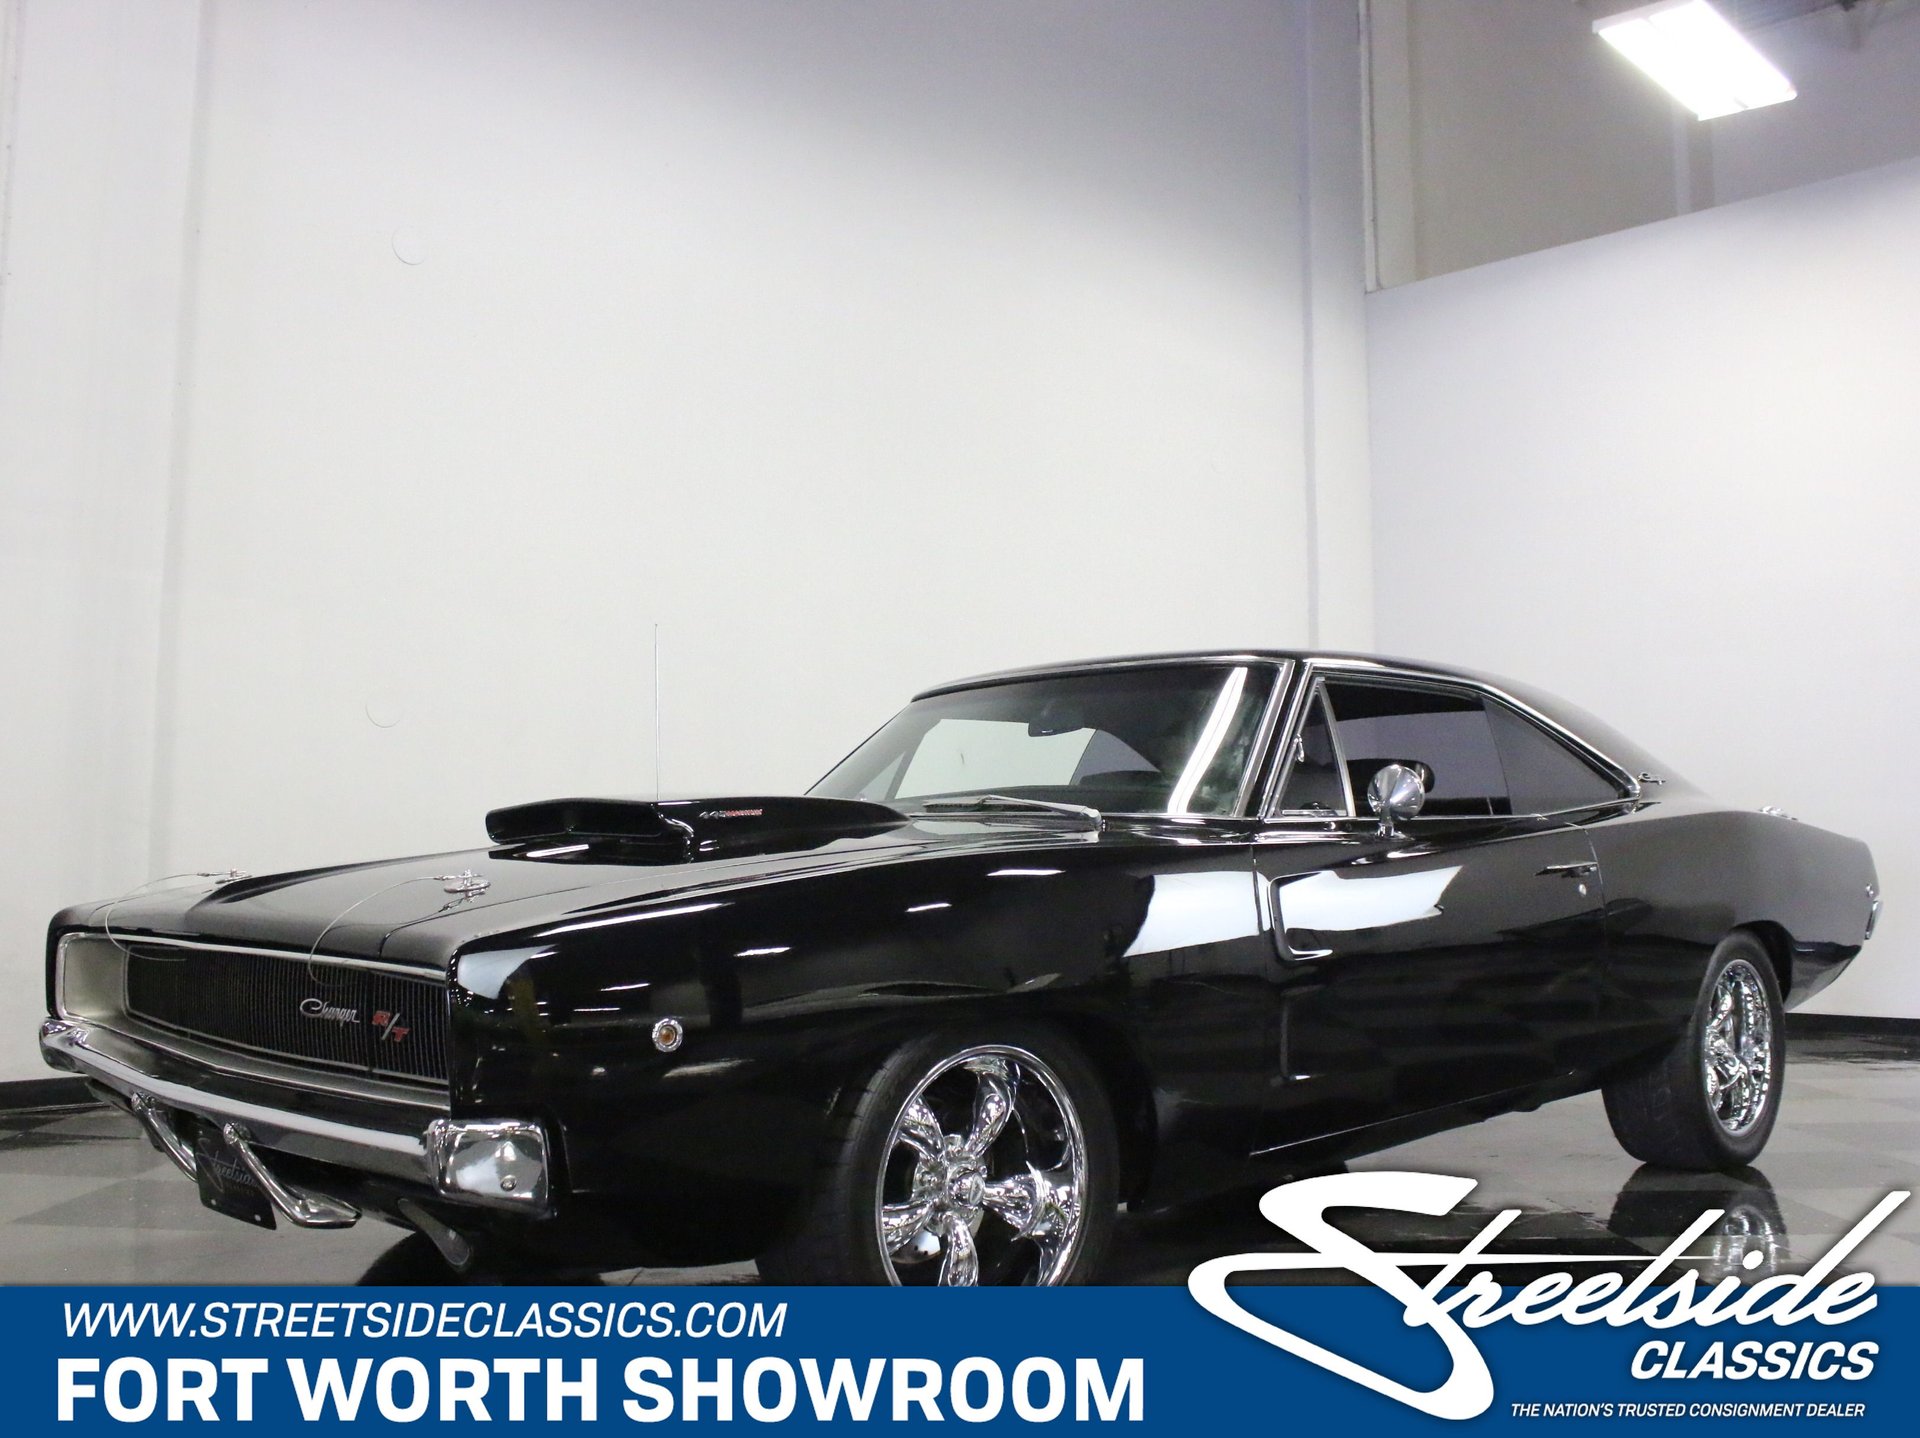 1968 Dodge Charger | Classic Cars for Sale - Streetside Classics